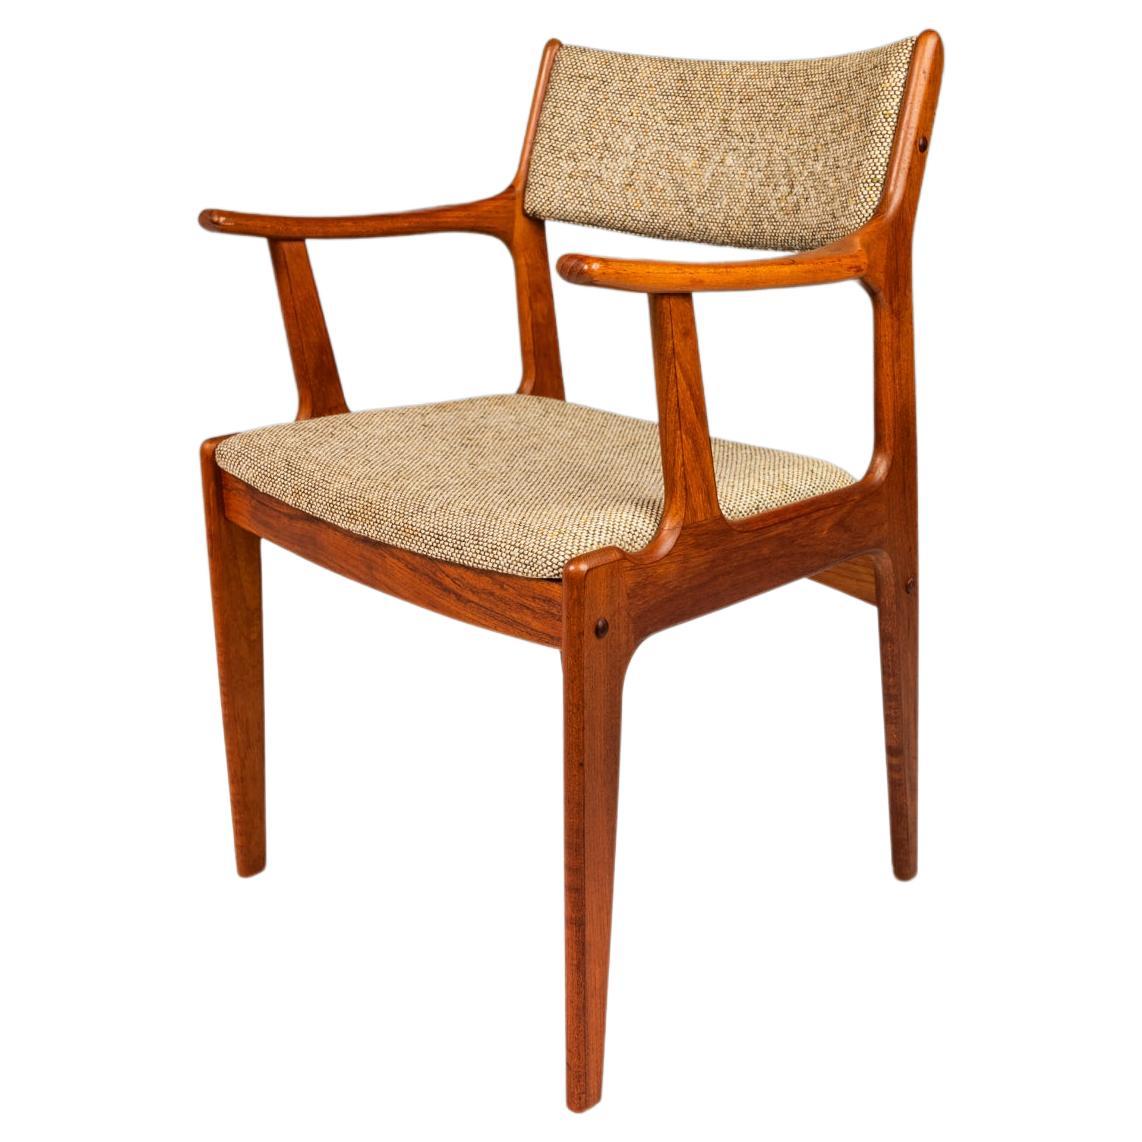 Danish Mid-Century Arm Chair in Solid Teak & Original Fabric by D-Scan, c. 1970s For Sale